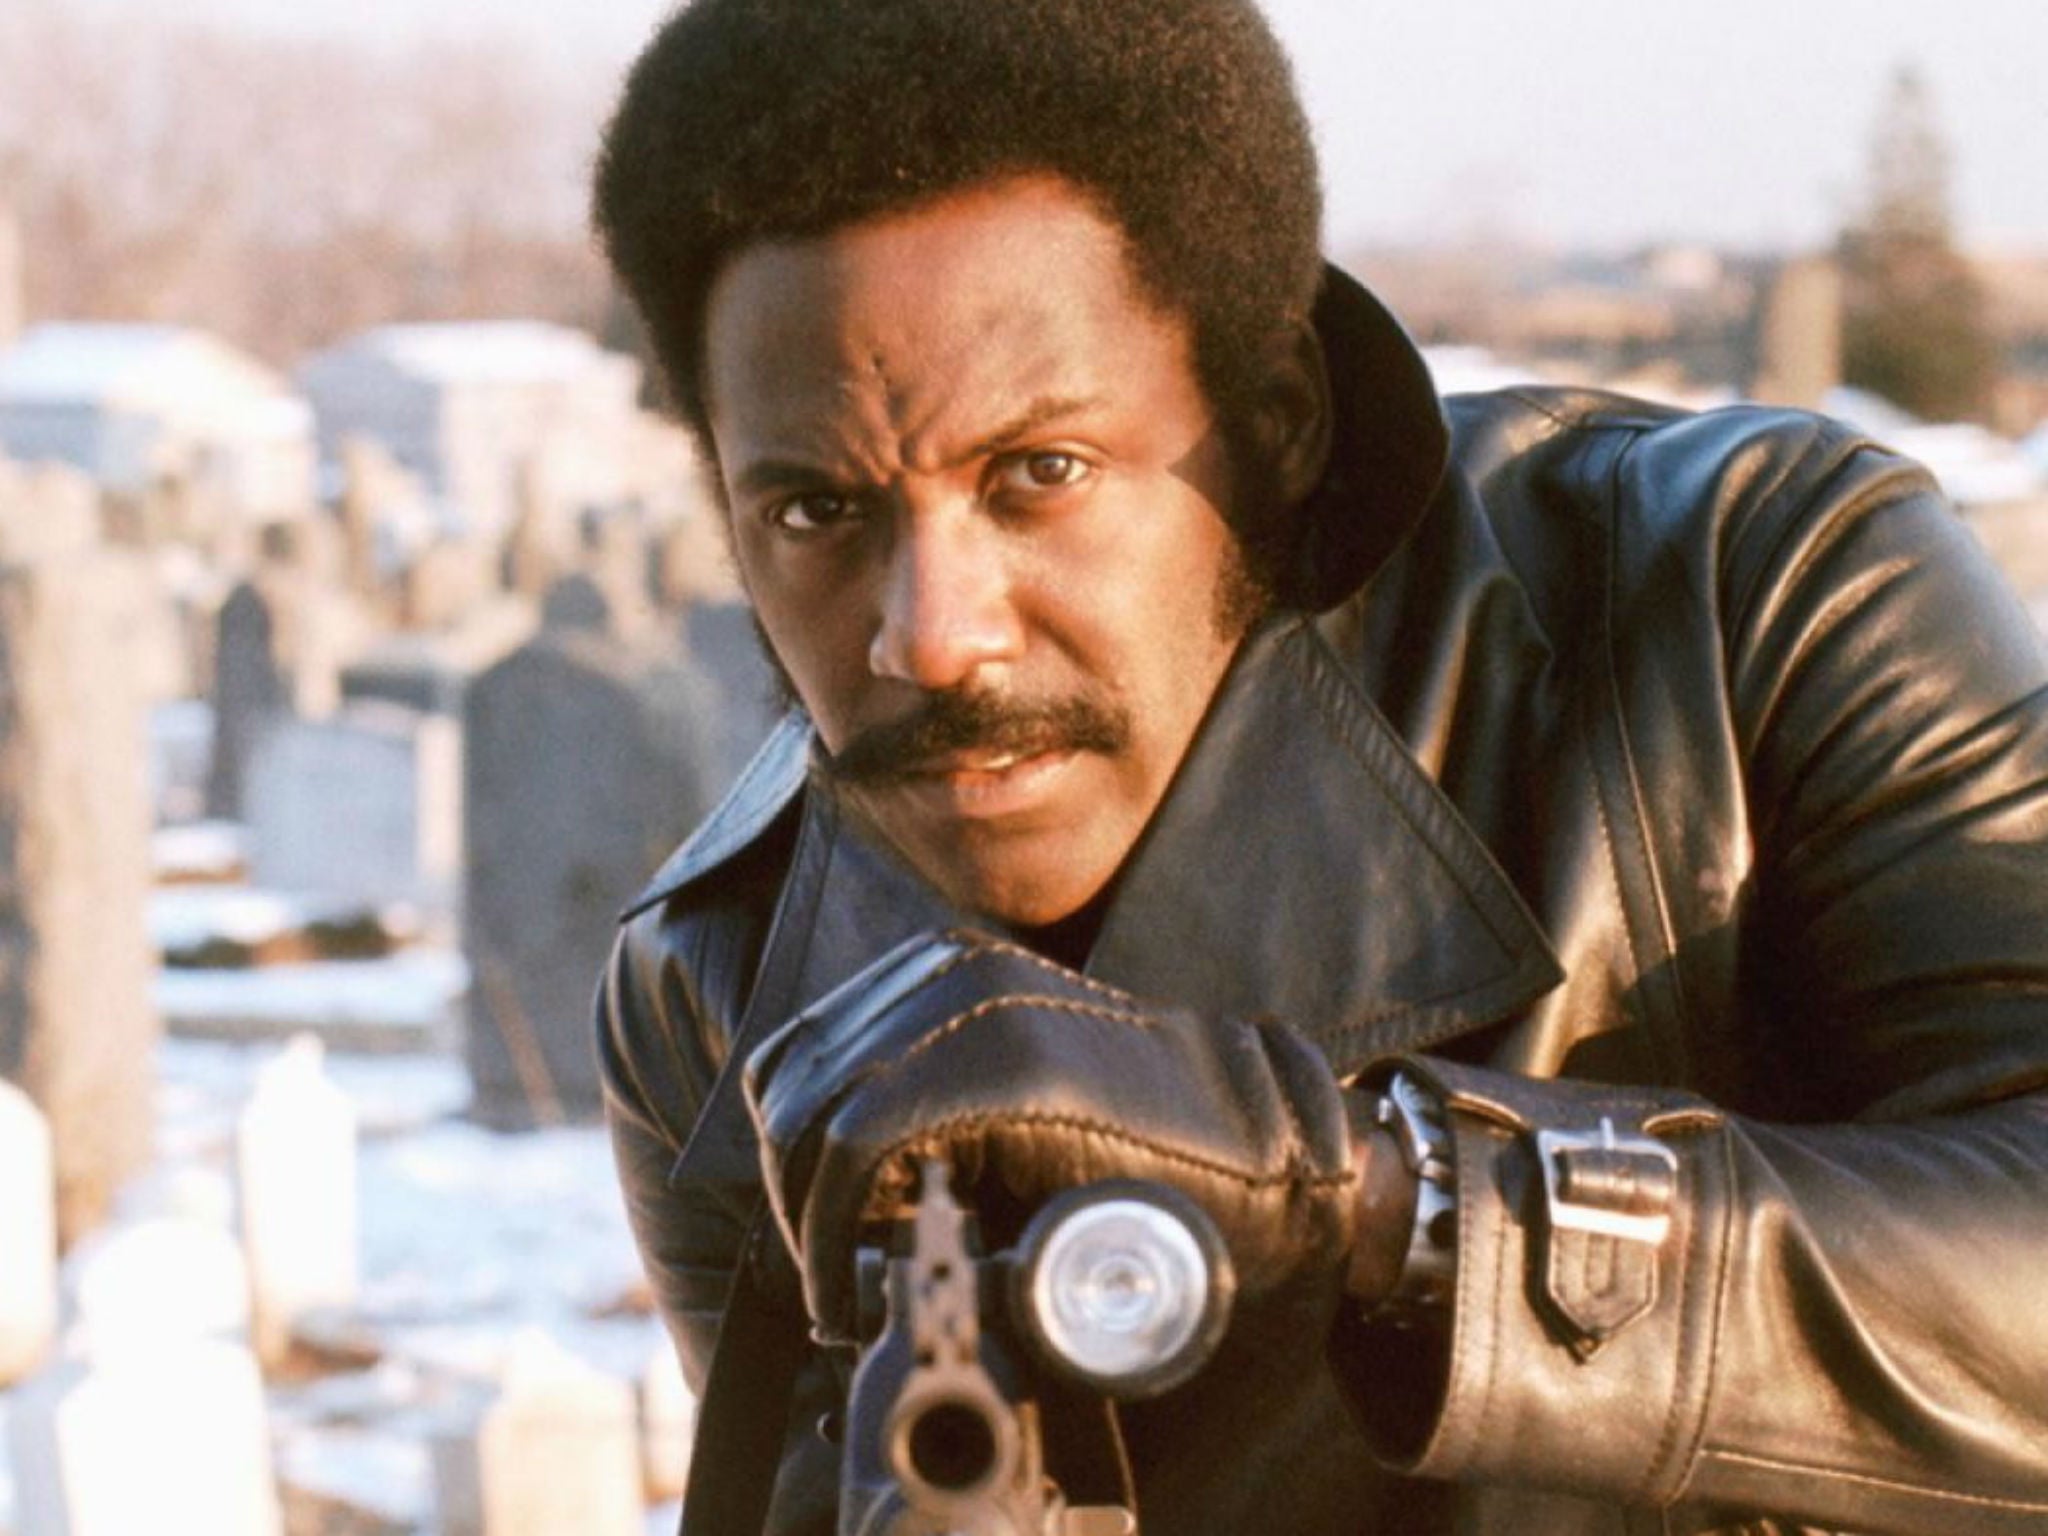 He was simply the best': Richard Roundtree, the actor who played Shaft, has  died at 81